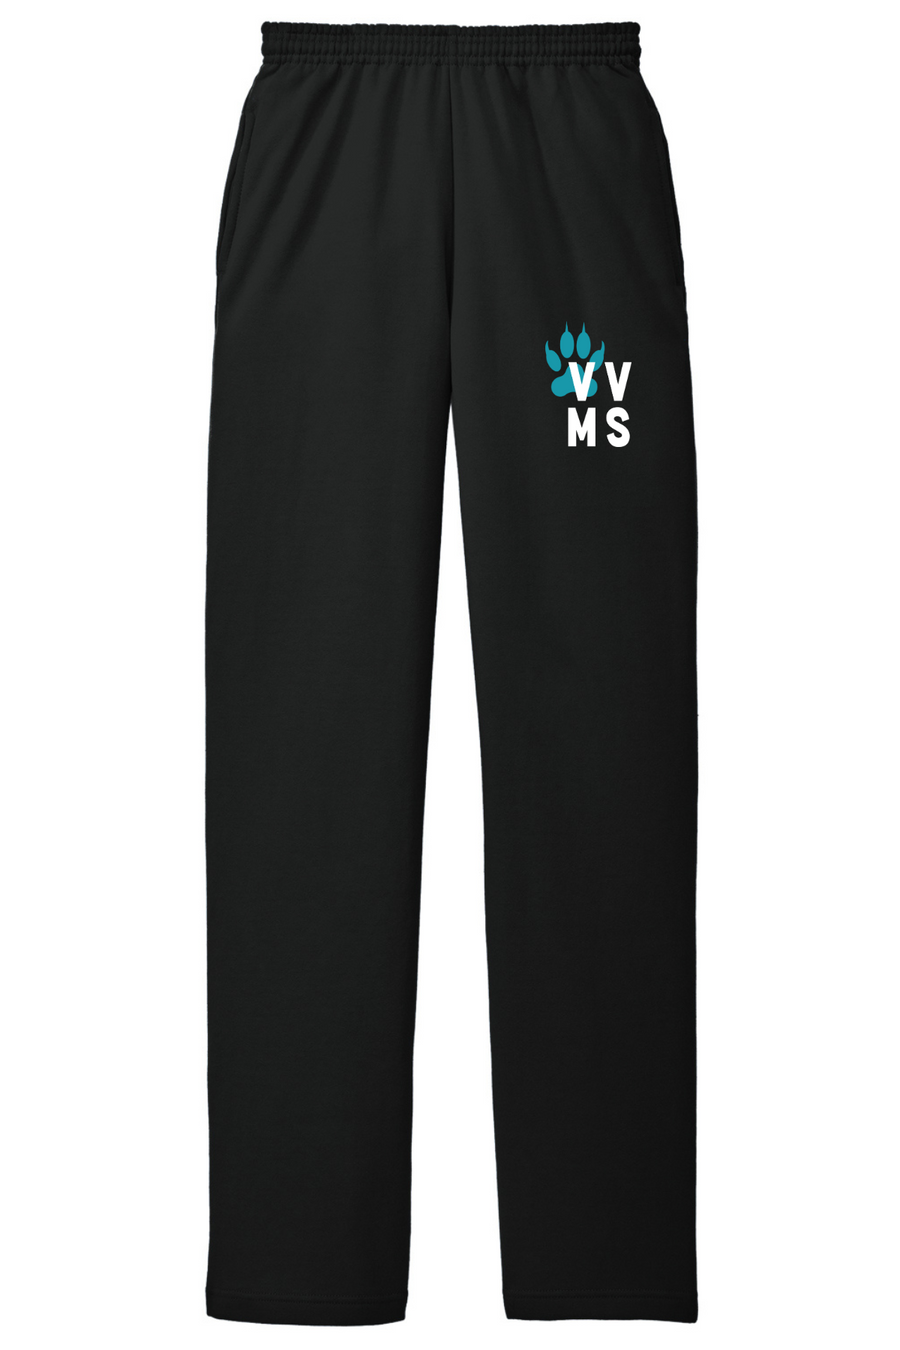 Valley View Middle School On-Demand-Unisex Sweatpants VVMS